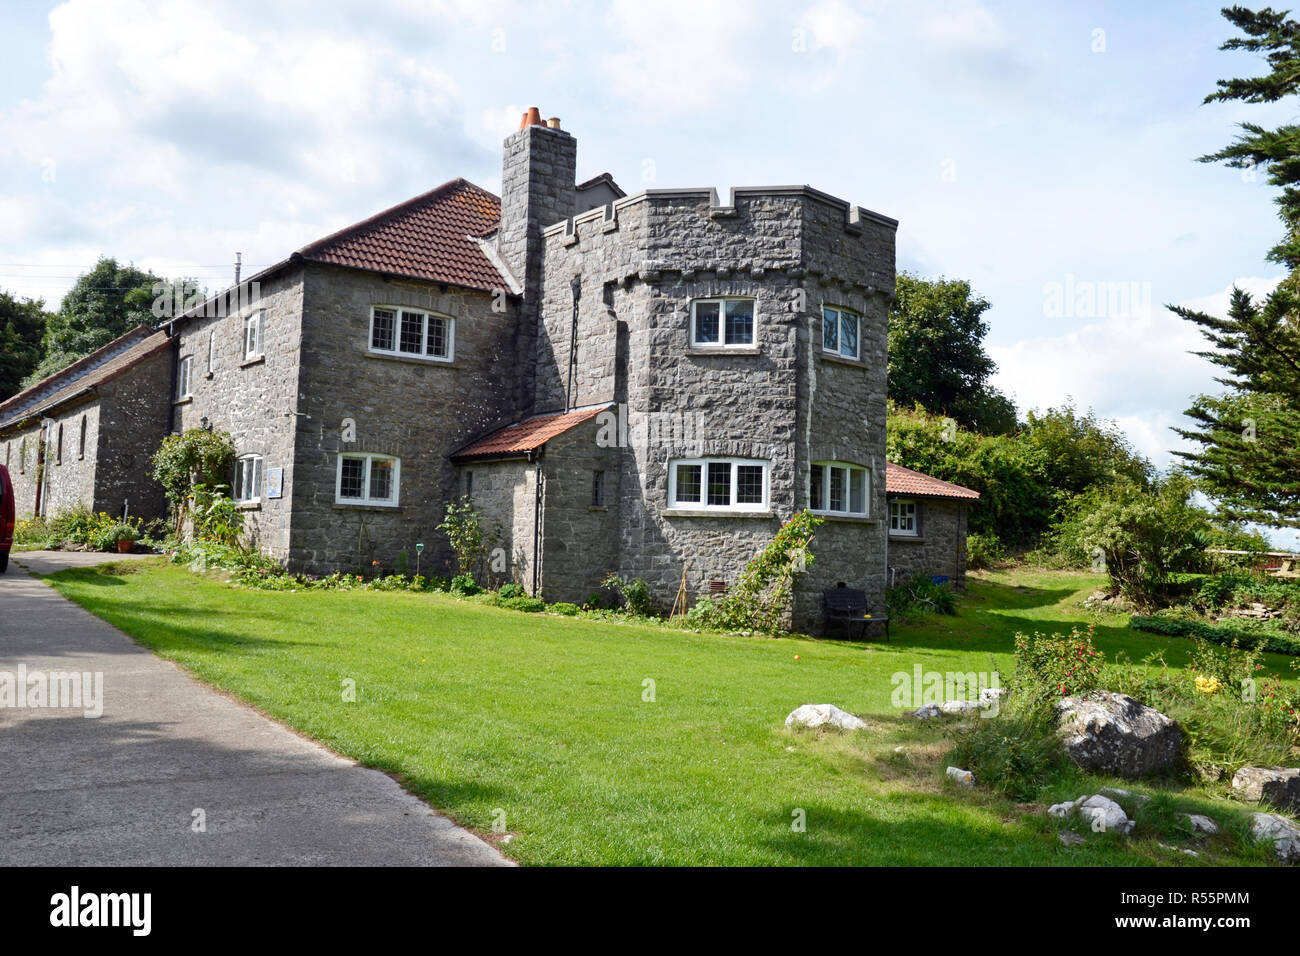 Bed and Breakfast accommodation at Caldey Island, near Tenby, Wales, UK Stock Photo